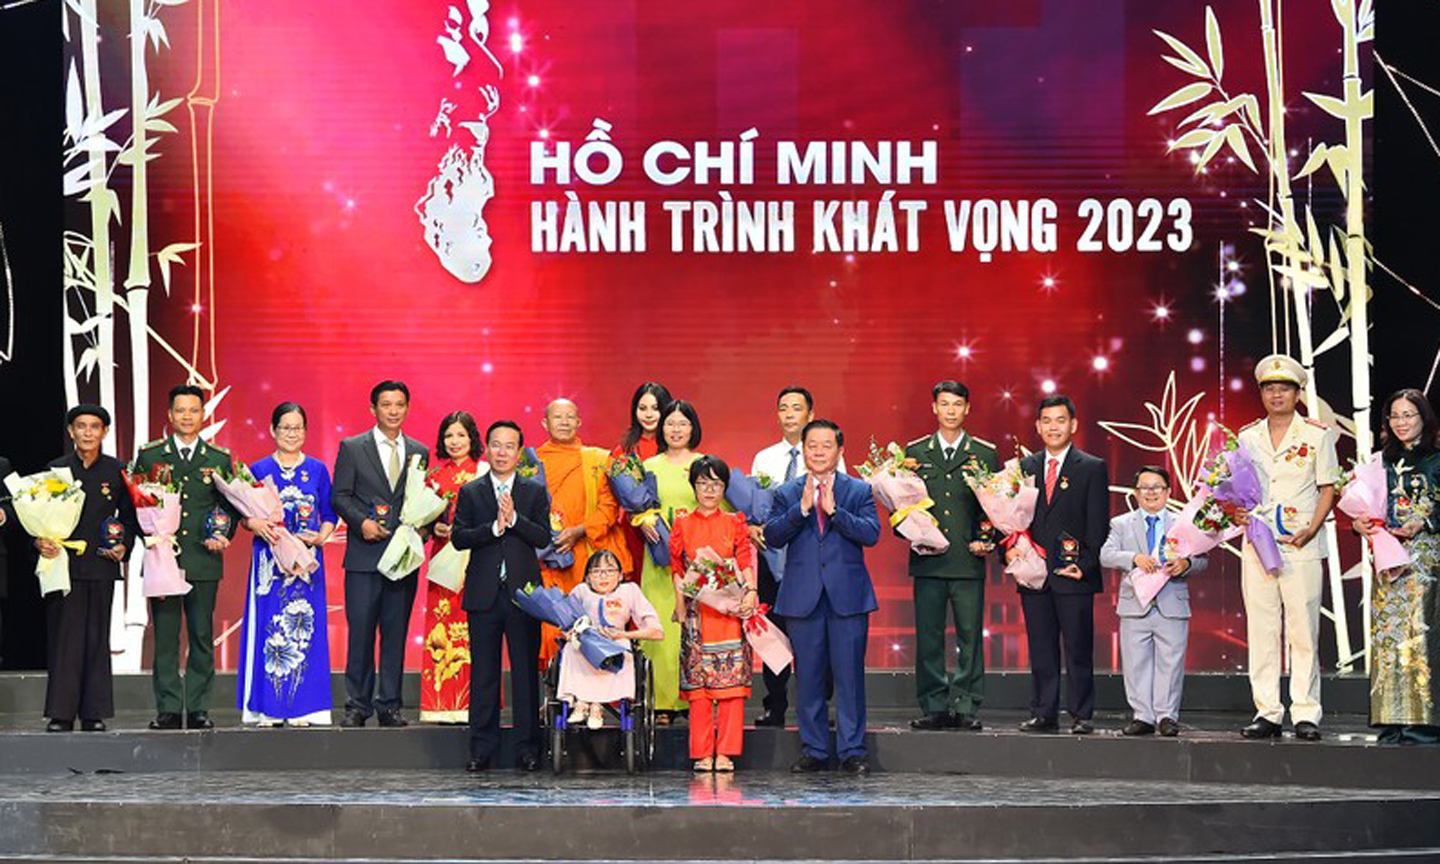 Outstanding exemplars in studying and following President Ho Chi Minh’s ideology and lifestyle honoured at a ceremony (Photo: NDO).